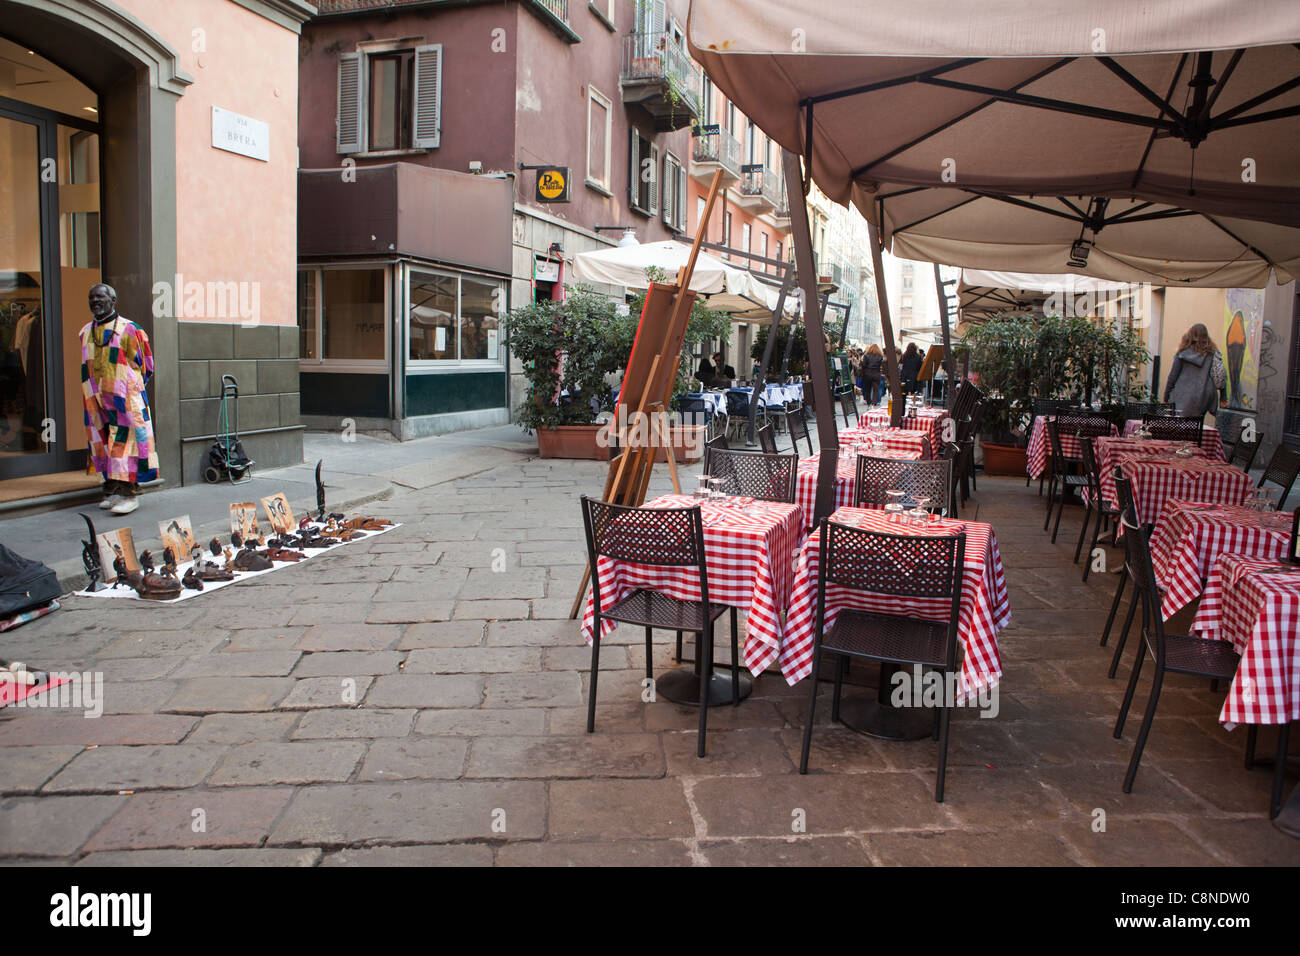 Outdoor restaurant in the Brera district of Milan. African vendor selling items in front of the tables. Italy Stock Photo